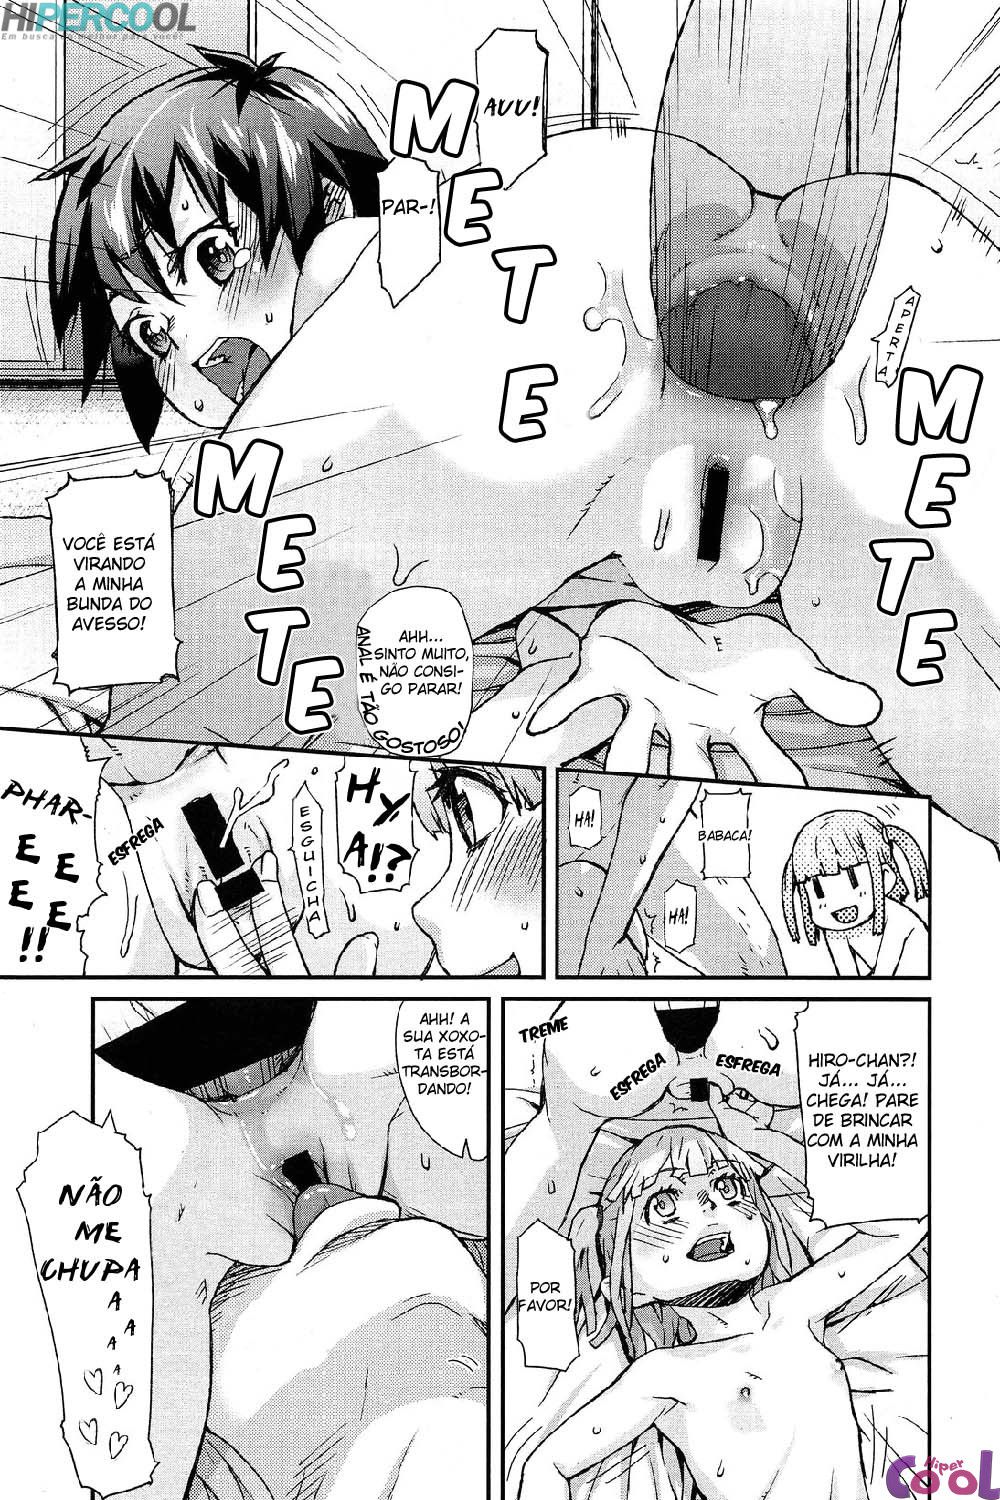 special-size--chapter-01-page-27.jpg